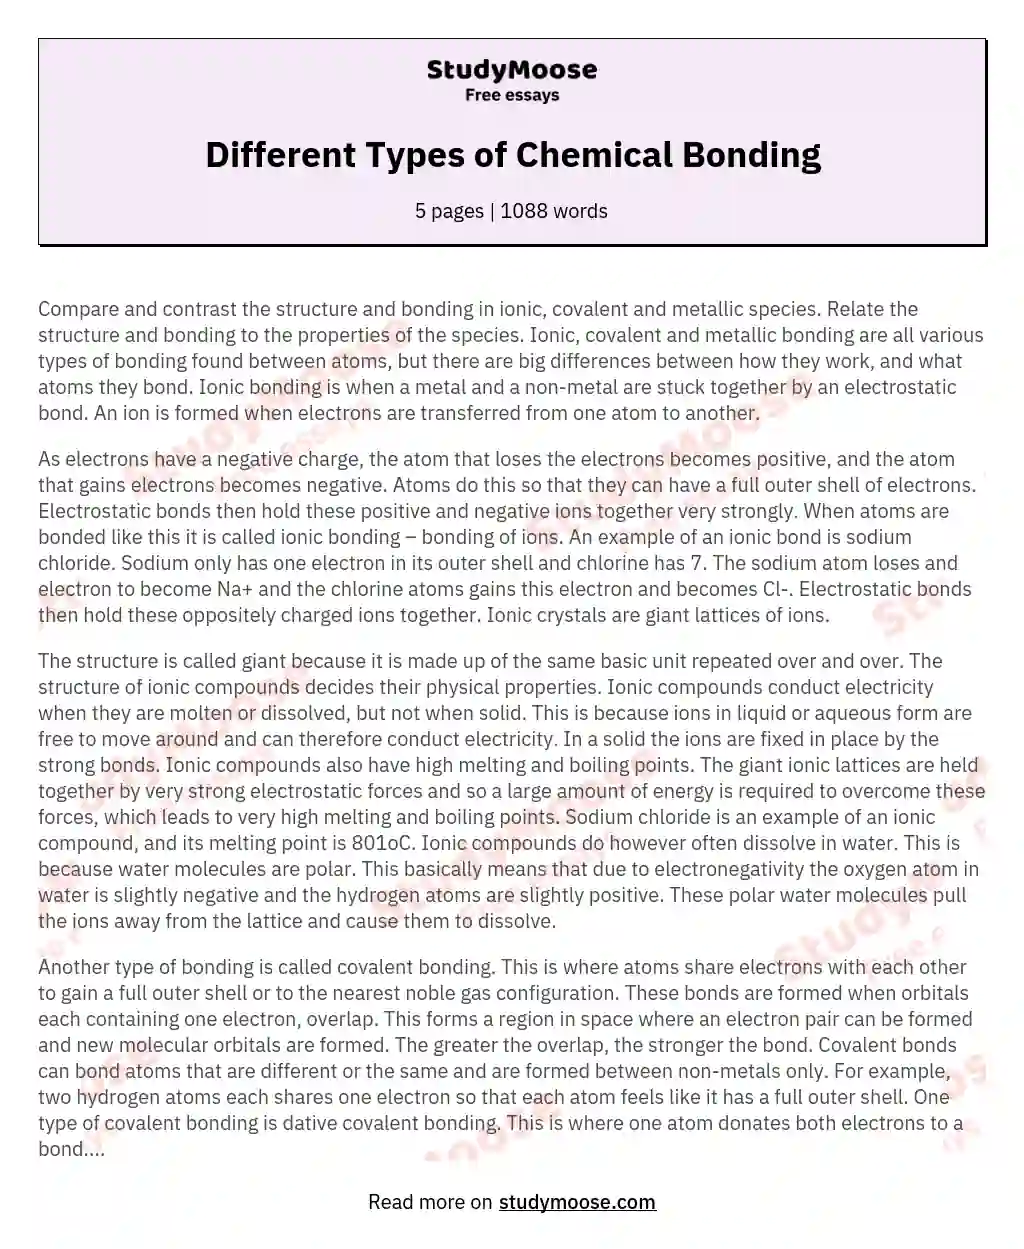 Different Types of Chemical Bonding essay